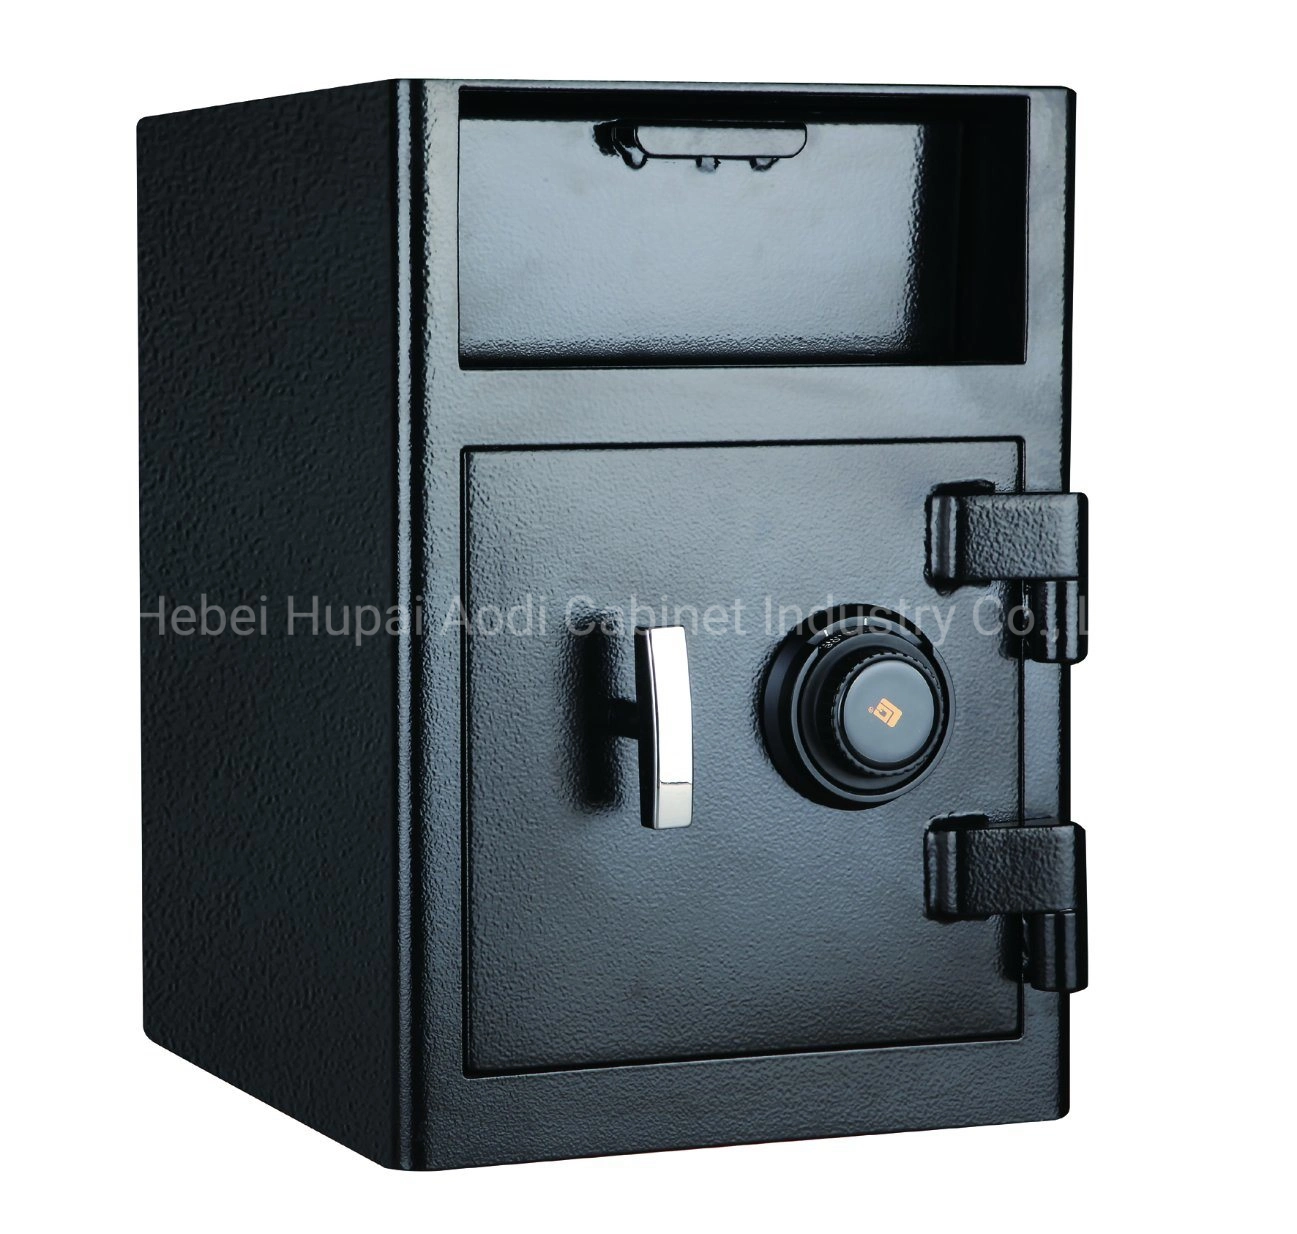 Electronic Deposit Safebox For Sale At Cost Price